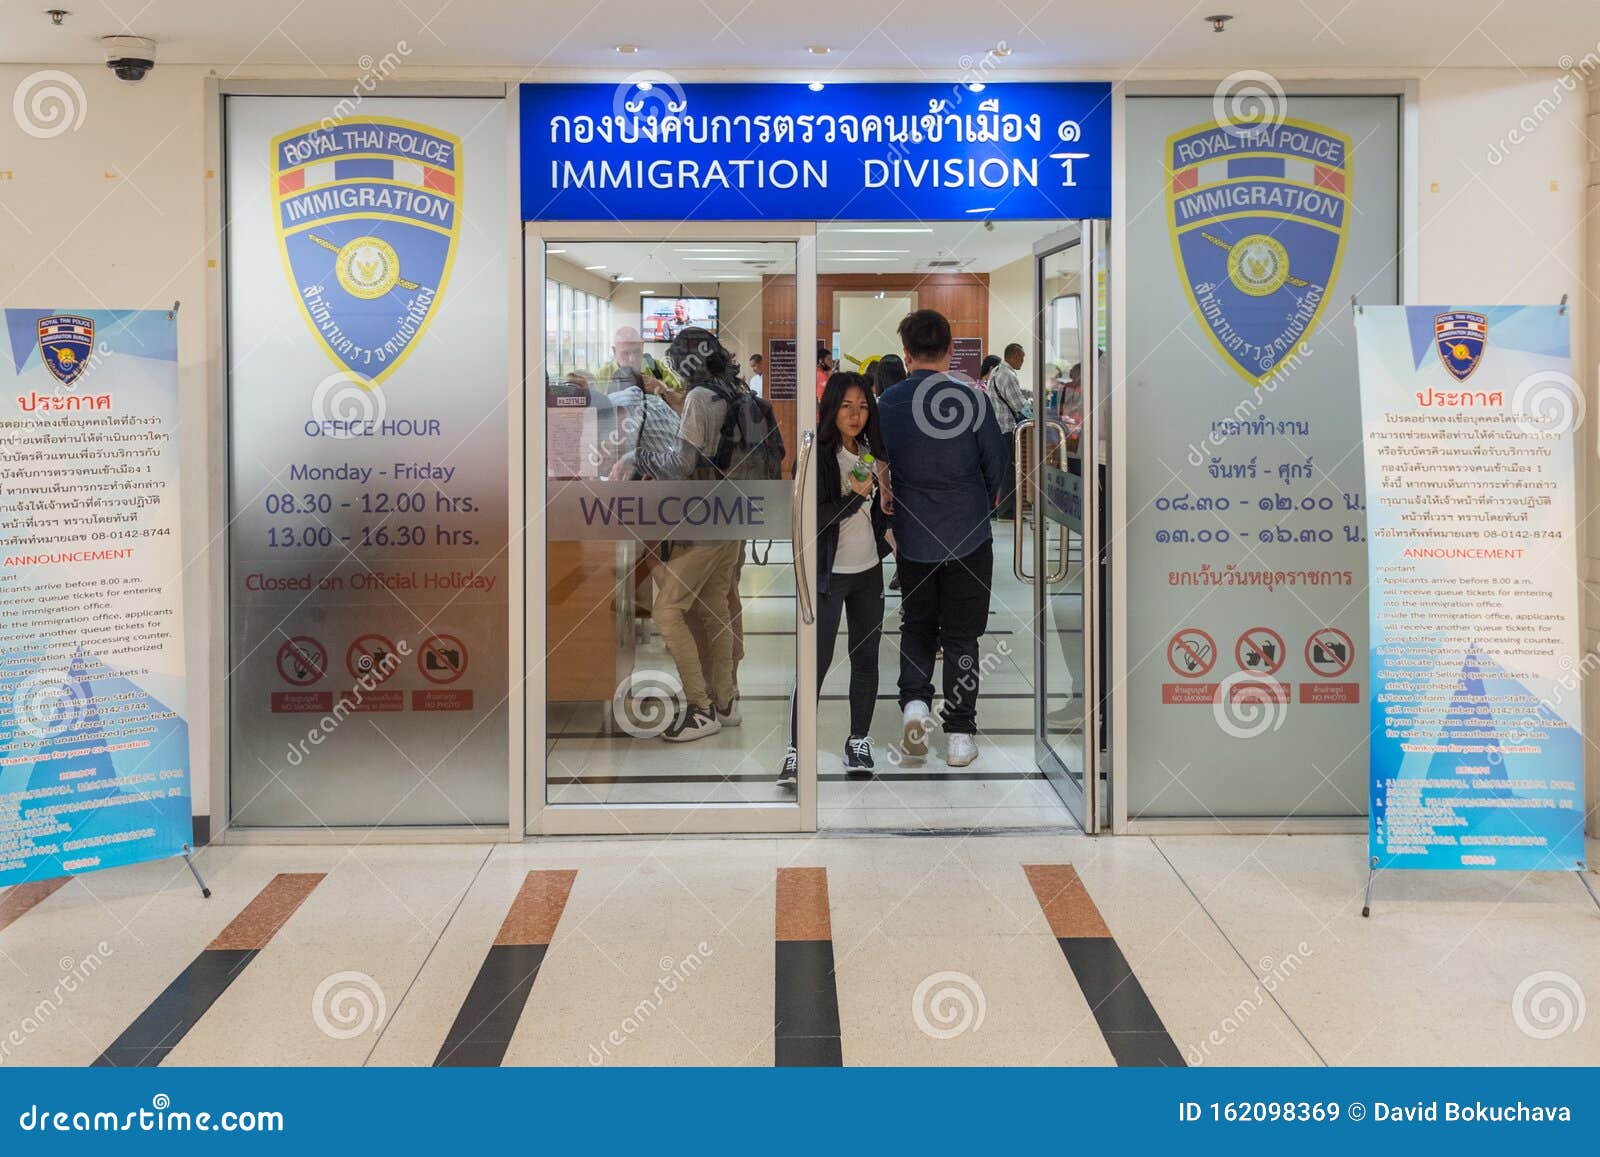 Thailand Immigration Office At Chaeng Watthana Government Complex Editorial Stock Image Image Of Entry Immigrant